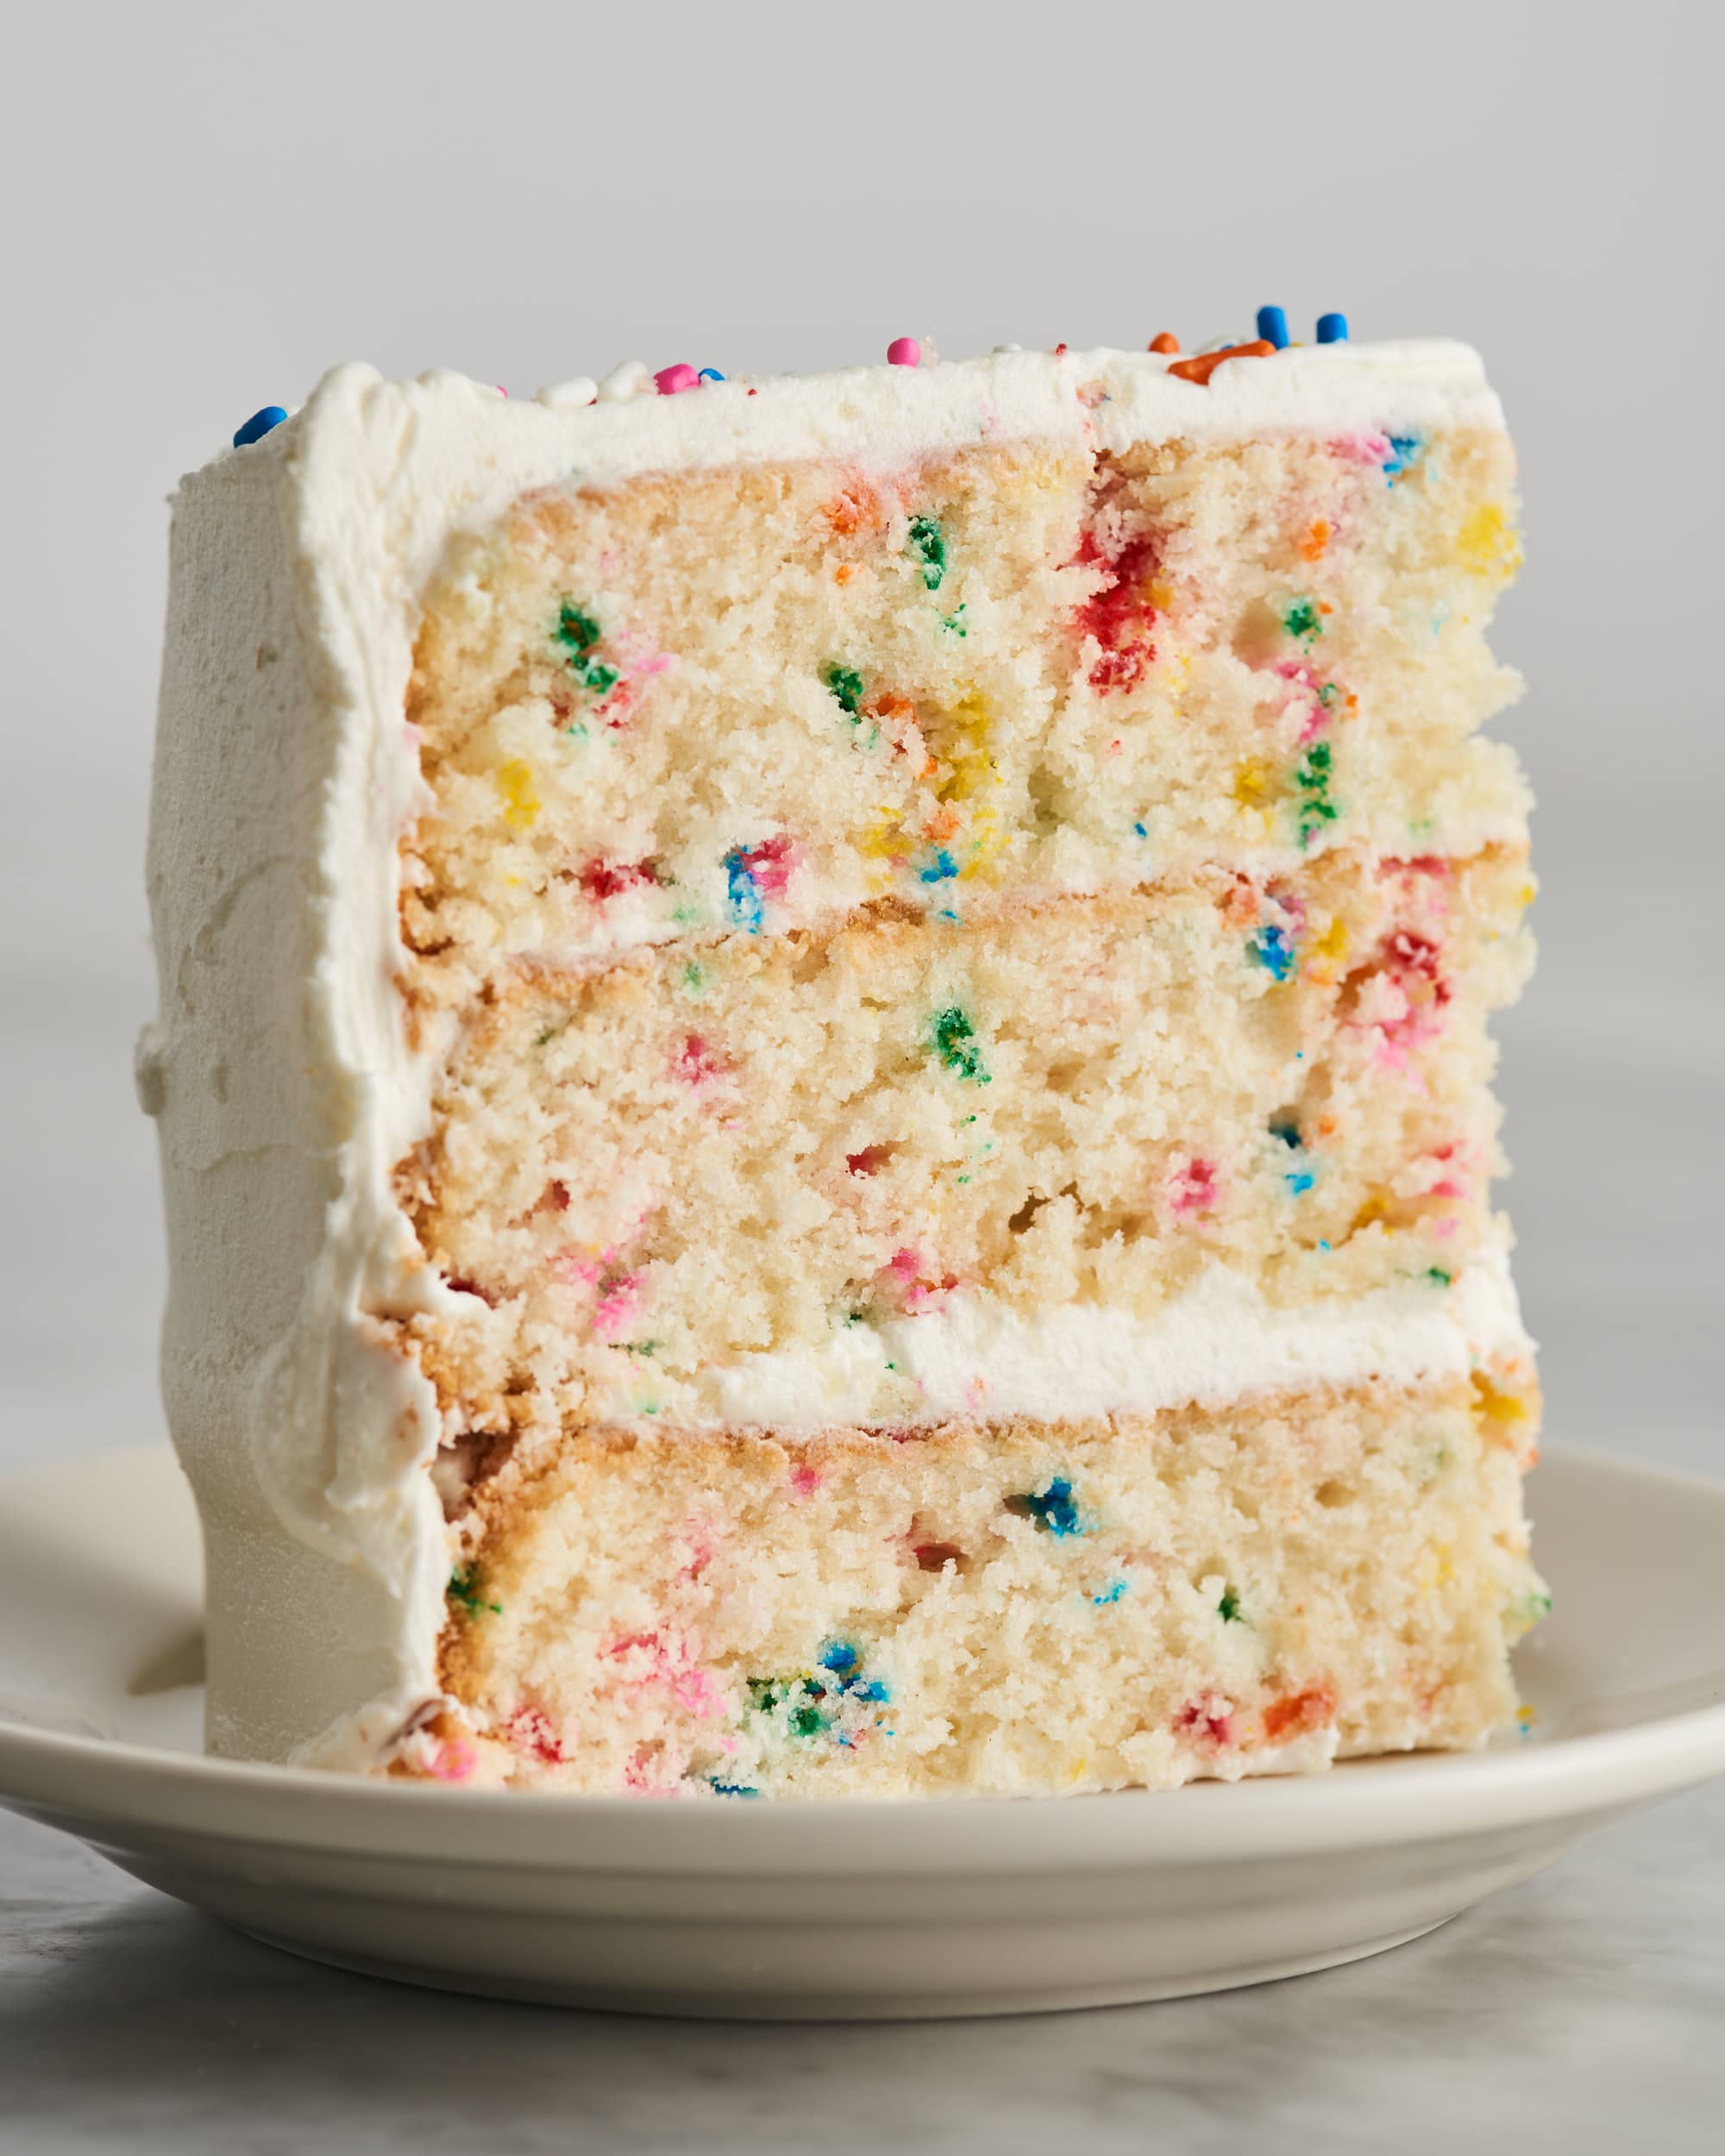 I Tried 4 Famous Funfetti Cake Recipes & the Winner Is Absolutely Flawless